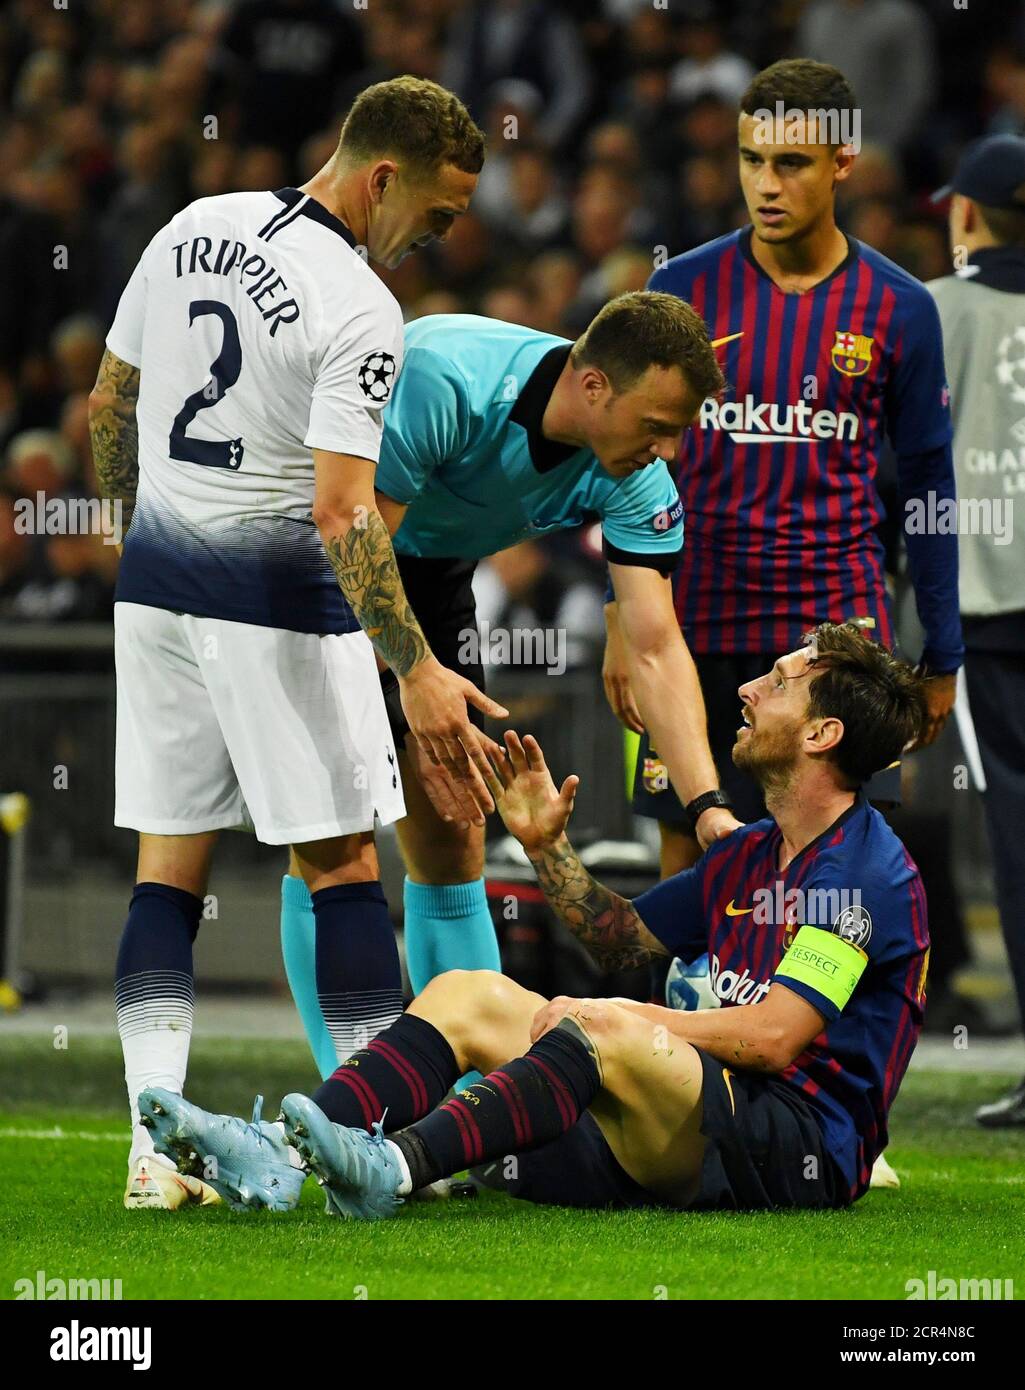 Soccer Football - Champions League - Group Stage - Group B - Tottenham Hotspur v FC Barcelona - Wembley Stadium, London, Britain - October 3, 2018  Refere Felix Zwayer checks on Barcelona's Lionel Messi after a challenge by Tottenham's Kieran Trippier   REUTERS/Dylan Martinez Stock Photo